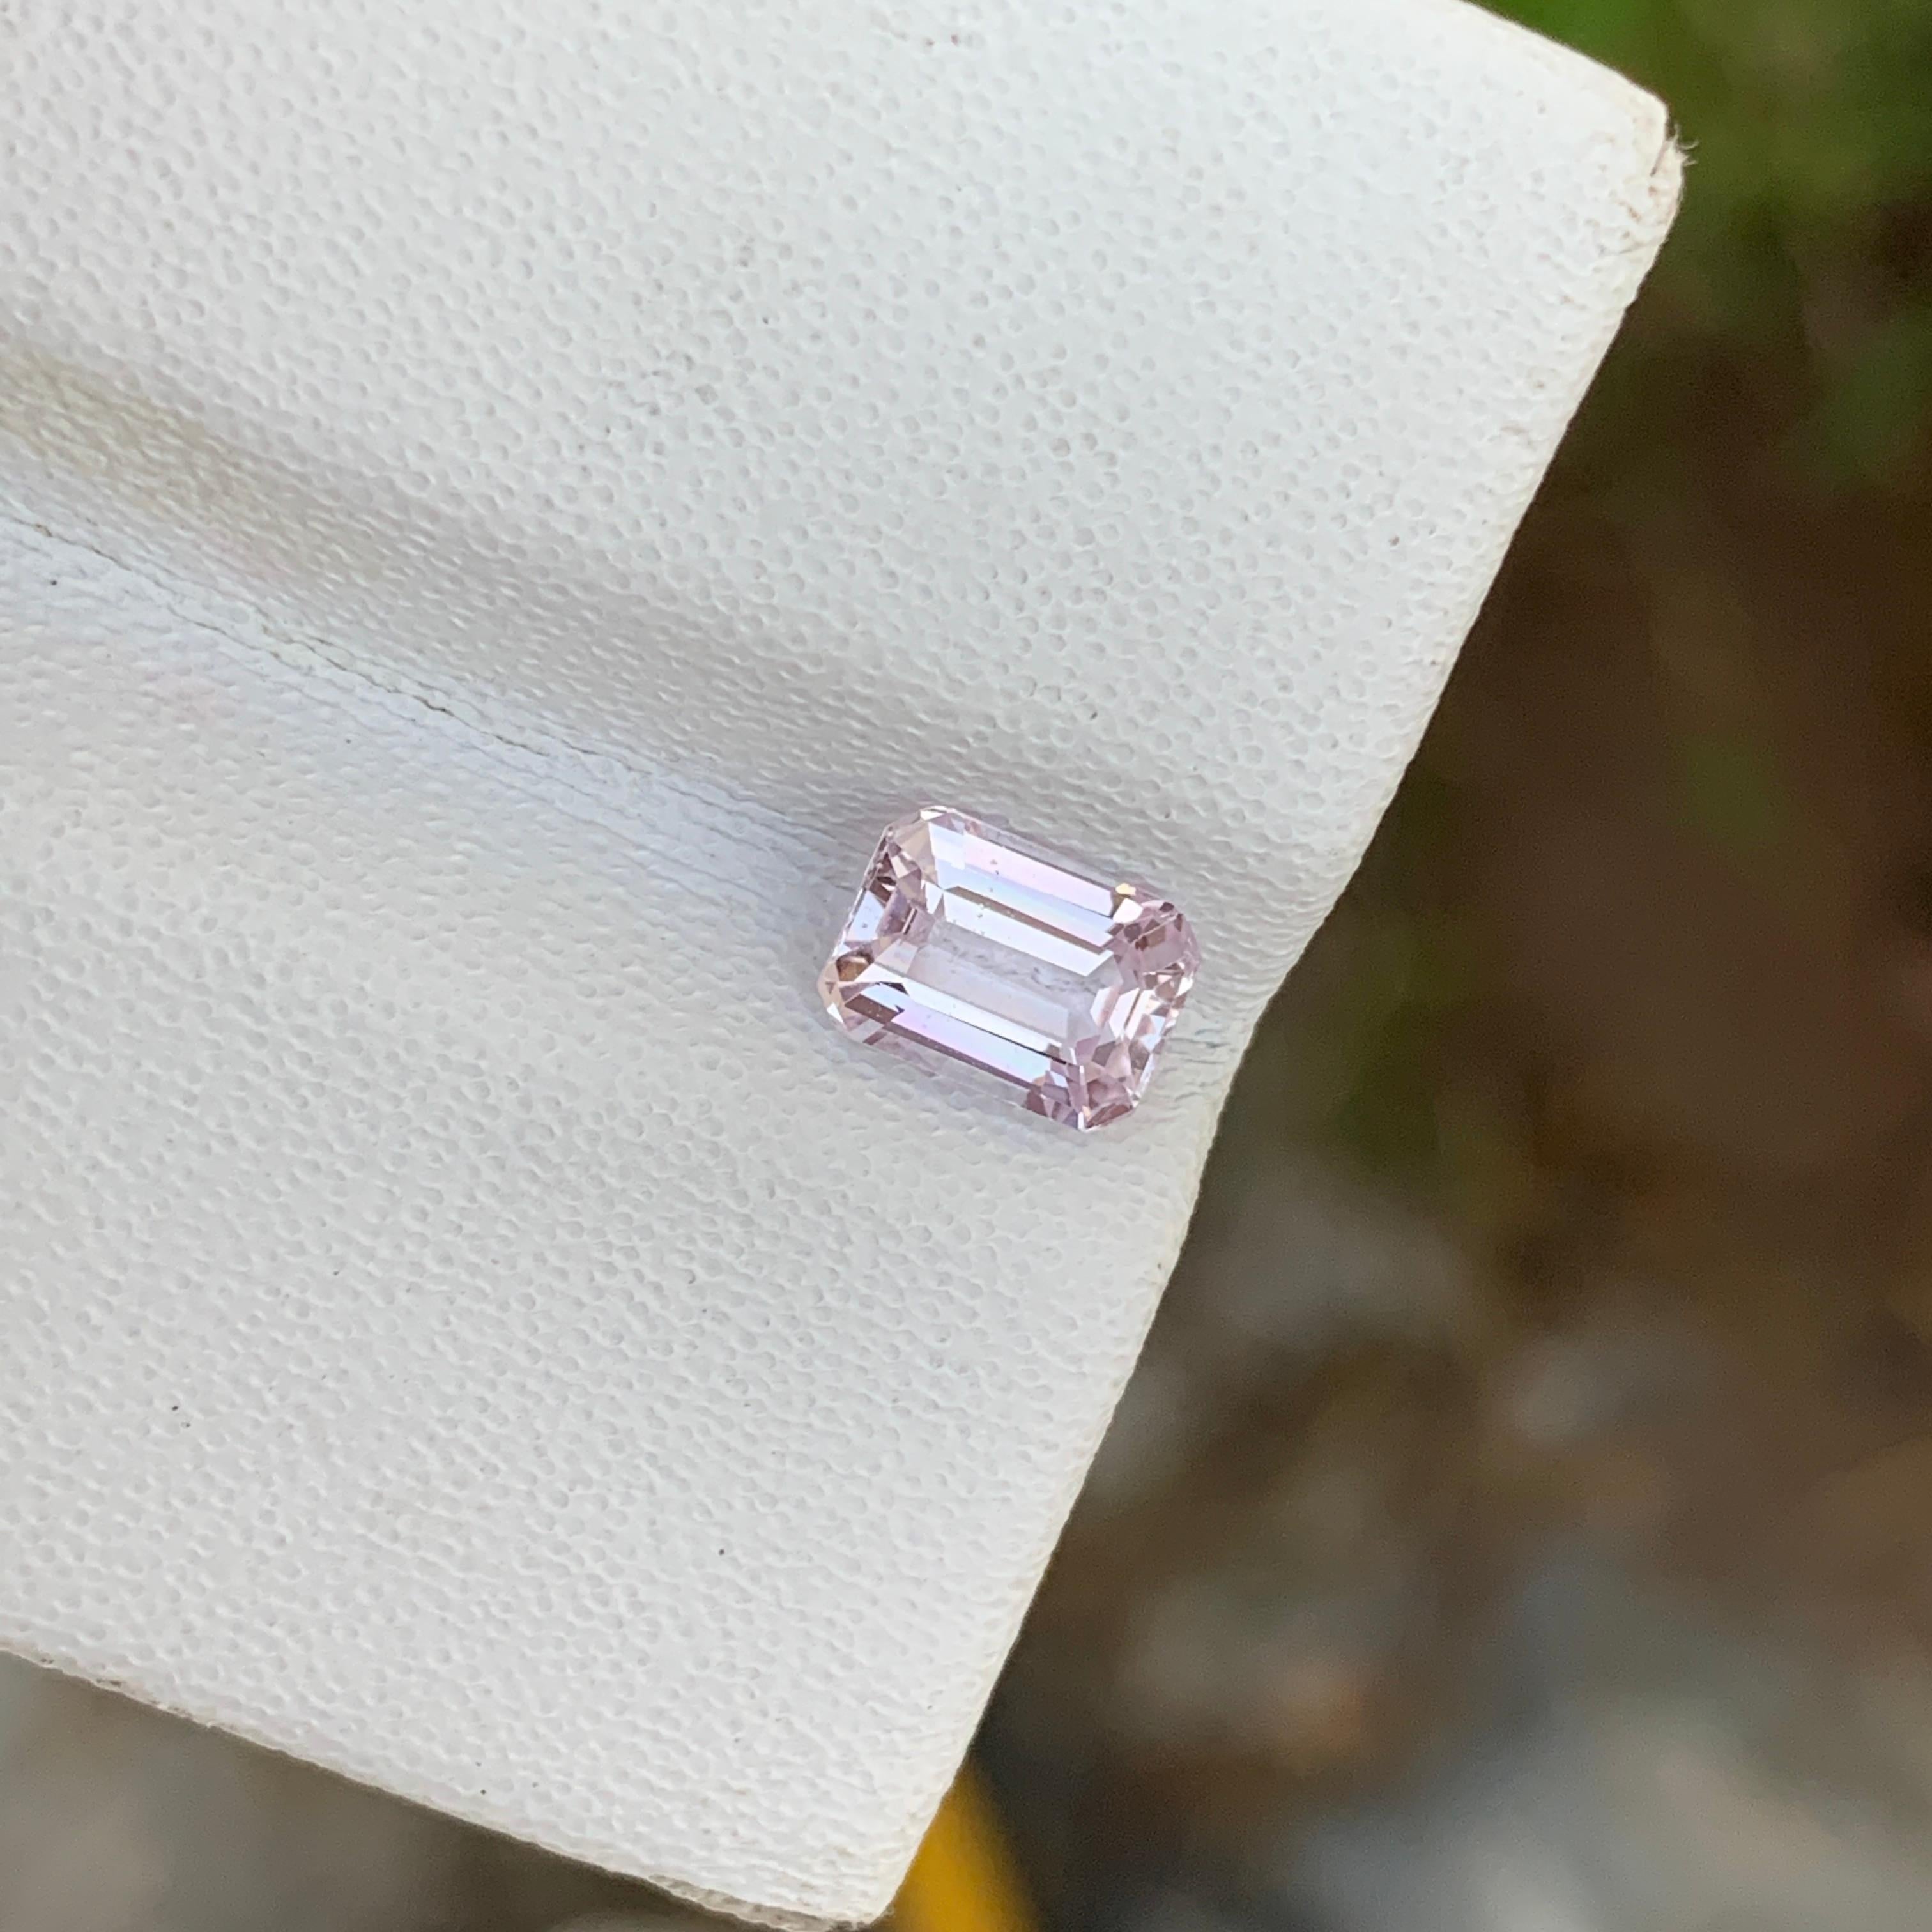 Loose Pink Sapphire 
Weight: 1.45 Carats 
Dimension: 7.1x5.1x3.5 Mm
Origin; Srilanka 
Treatment; Non
Color: Pale Pink
Certificate: Available 
A pale pink sapphire, also known as a pink sapphire or pink corundum, is a captivating and highly